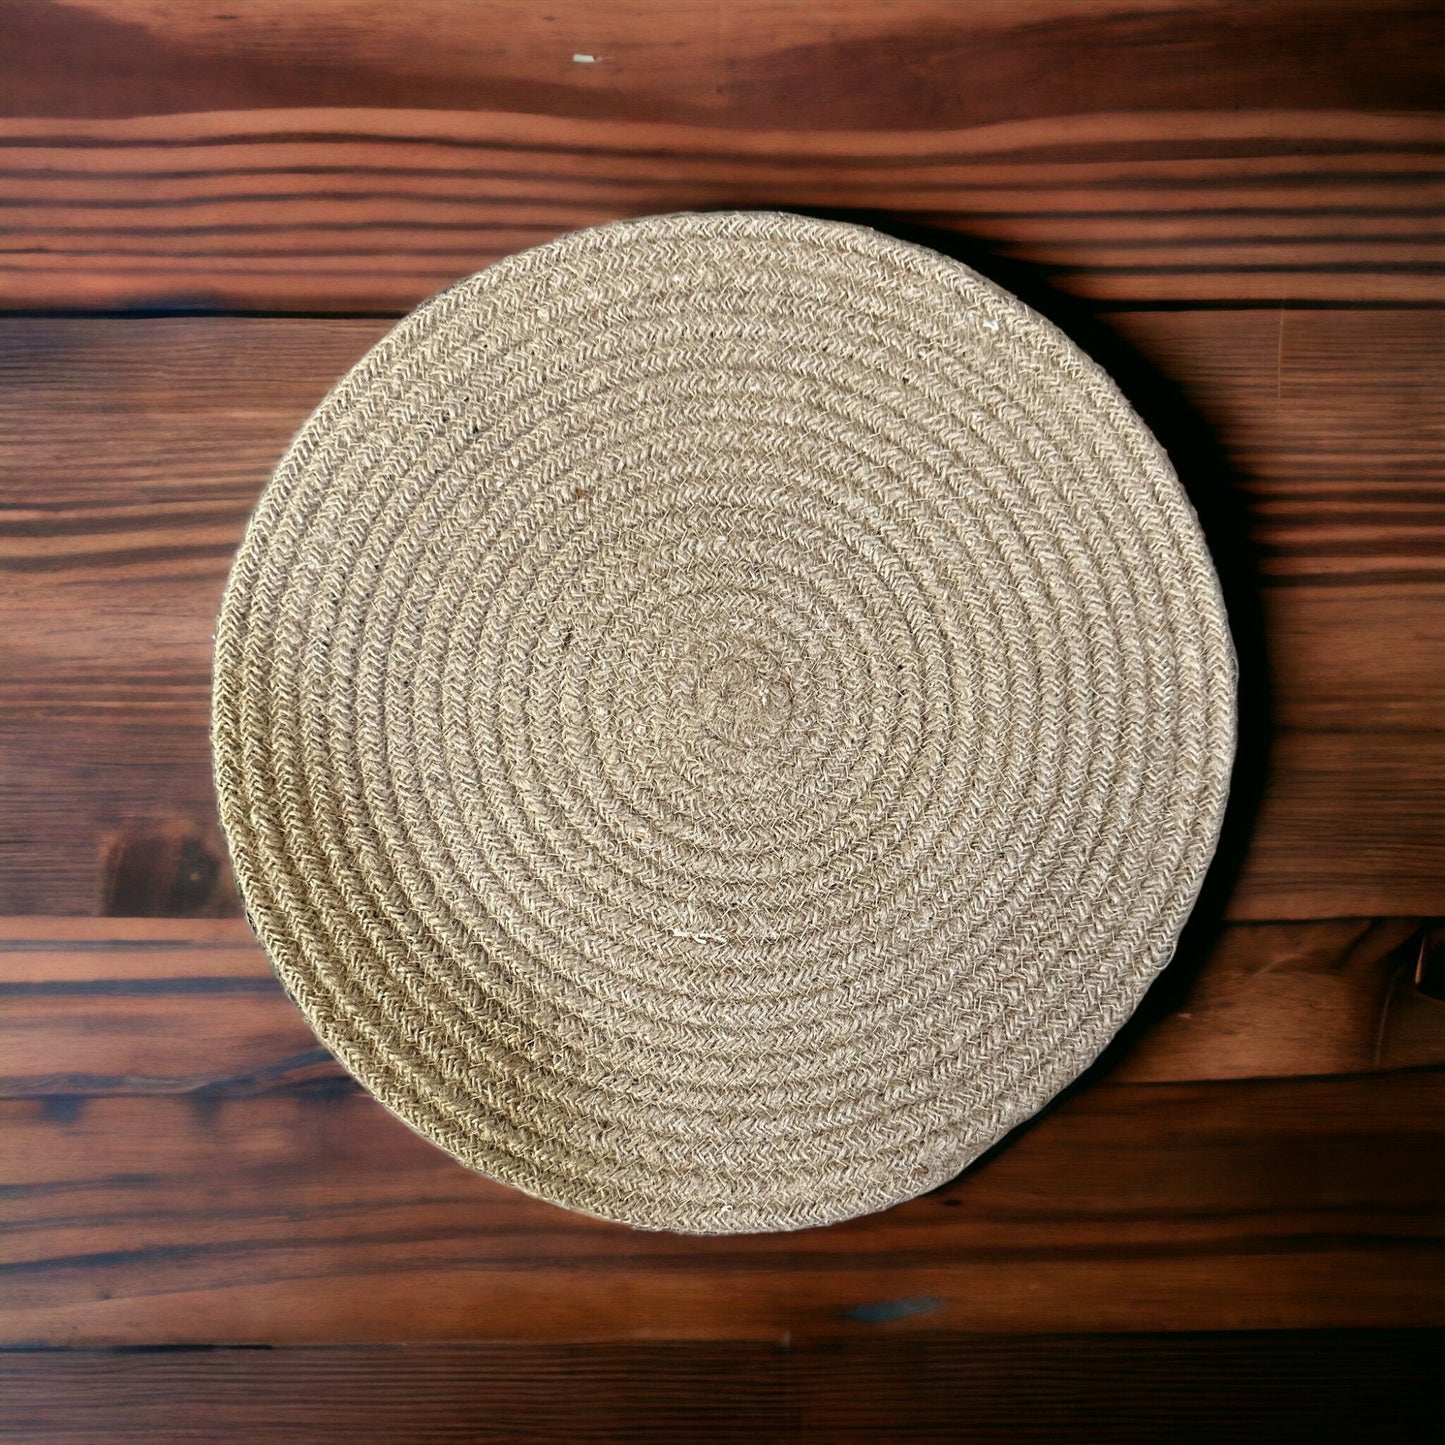 Jute place mats - set of two